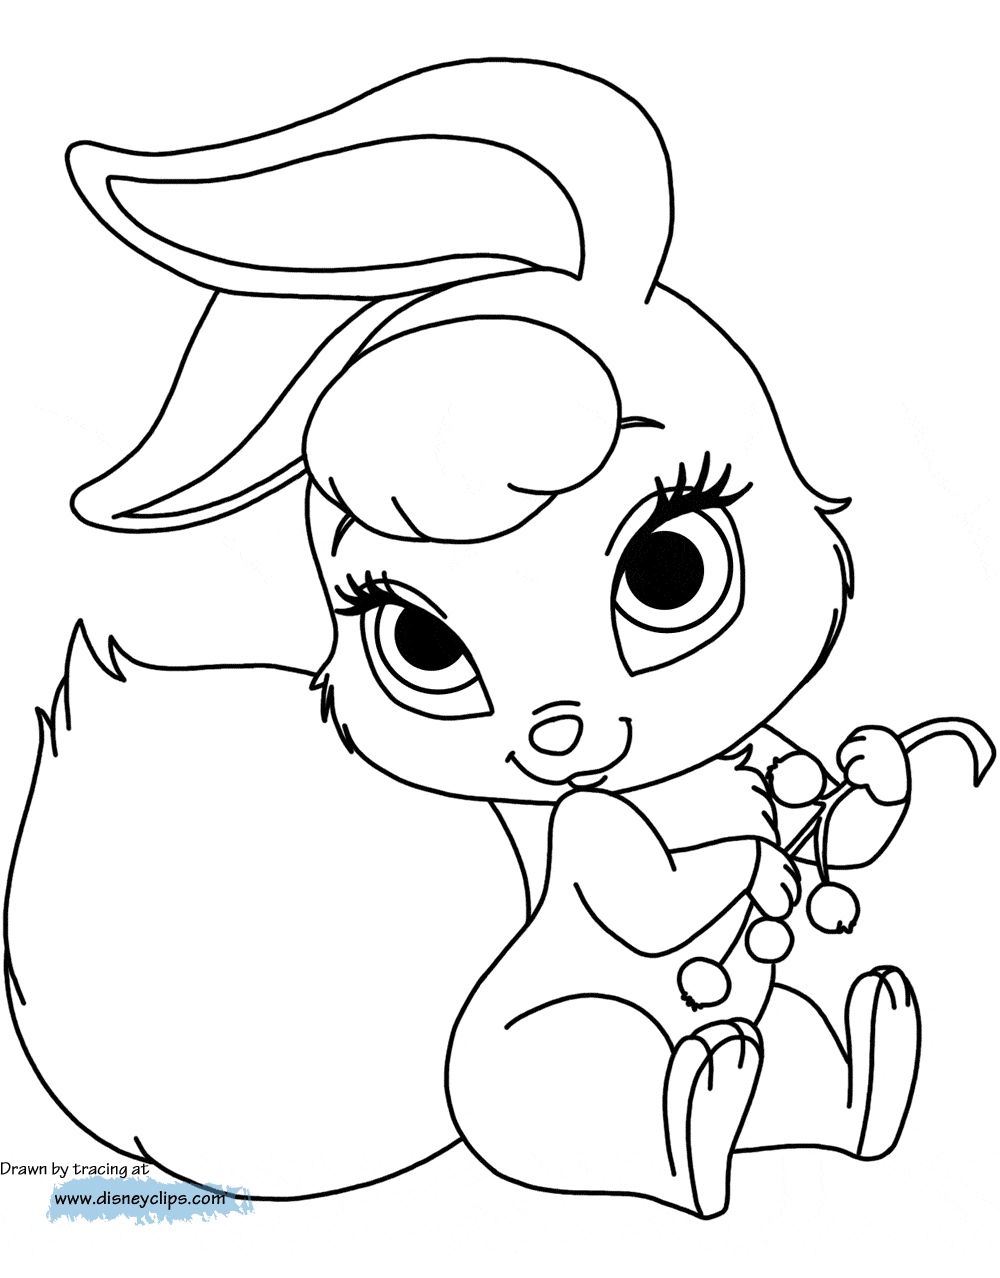 palace-pets-coloring-pages-3-disneyclips